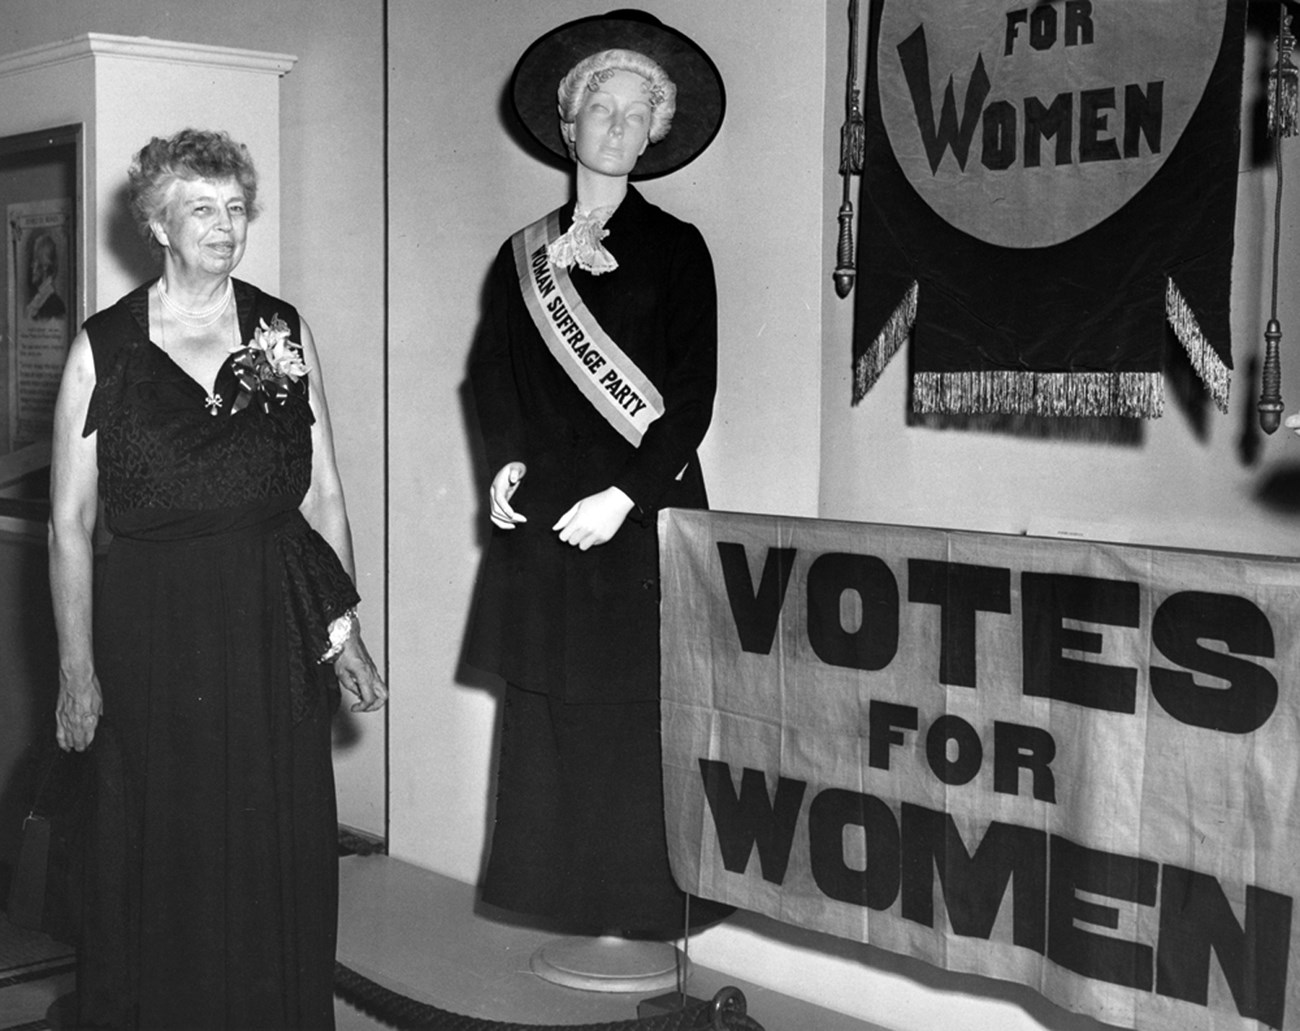 A woman wearing a formal gown stand near an exhibit on women's suffrage.